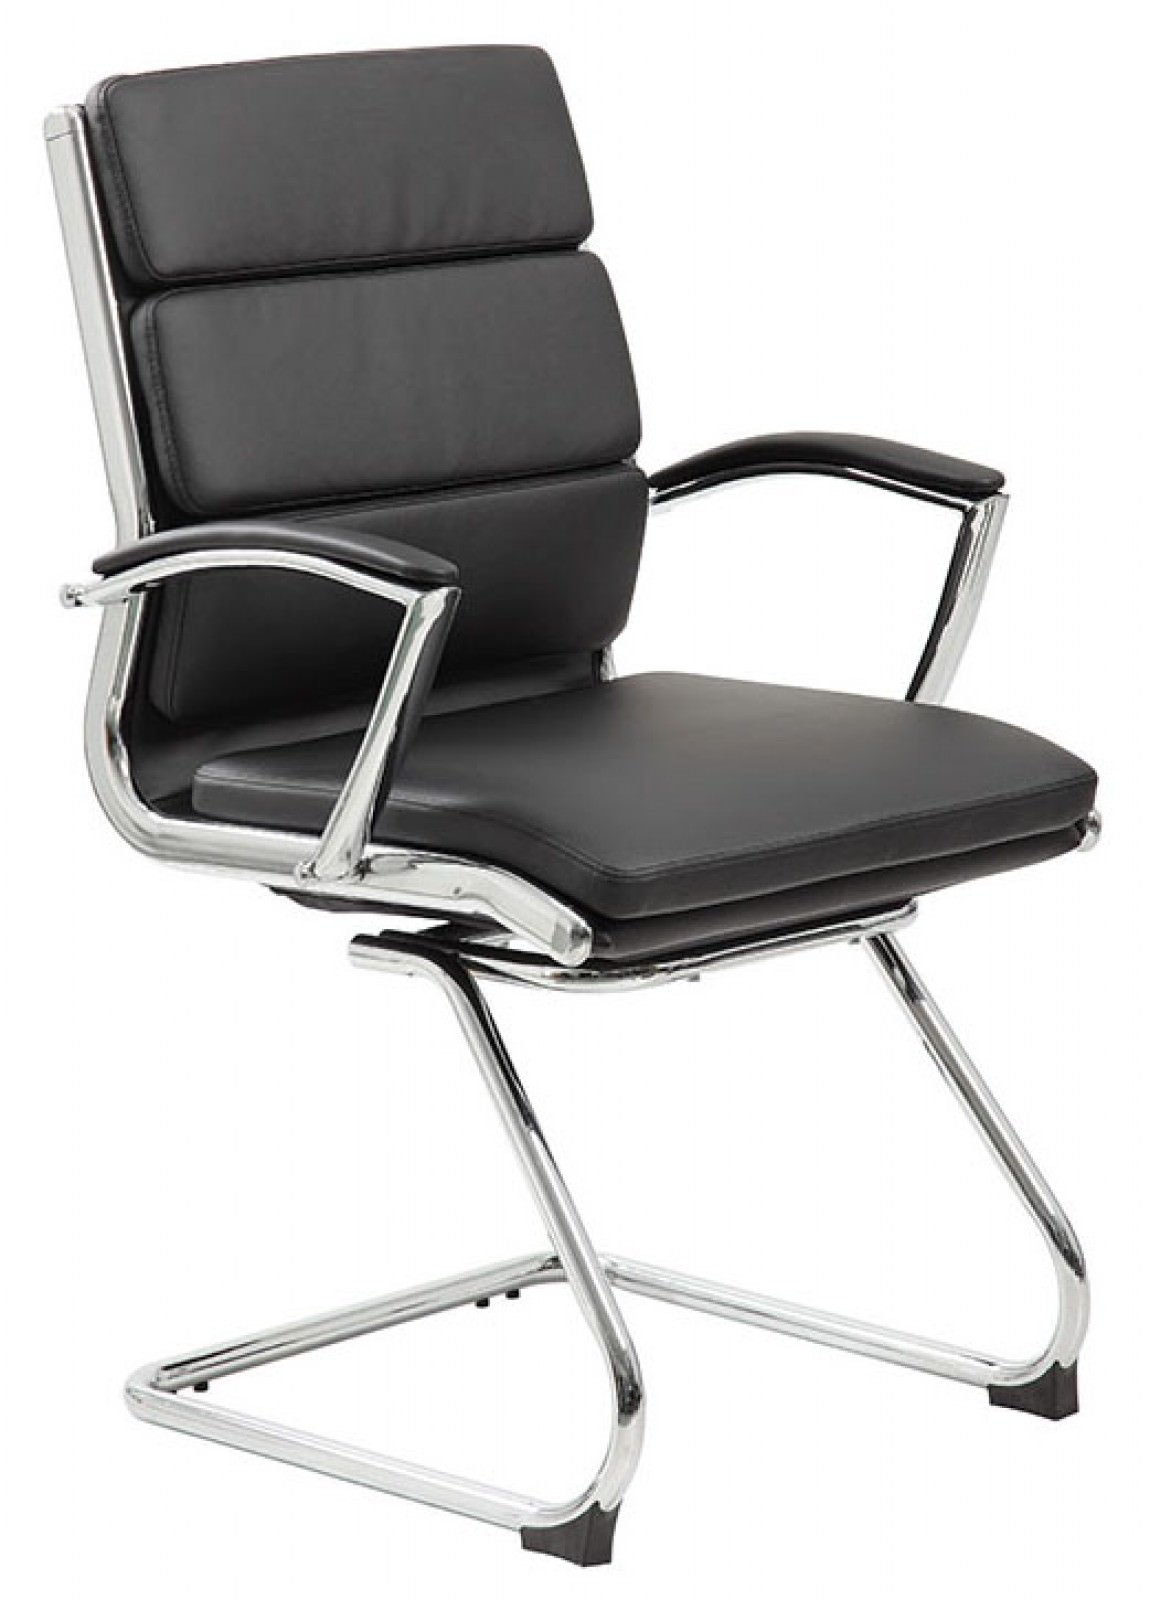 Chrome Based Accent Chair